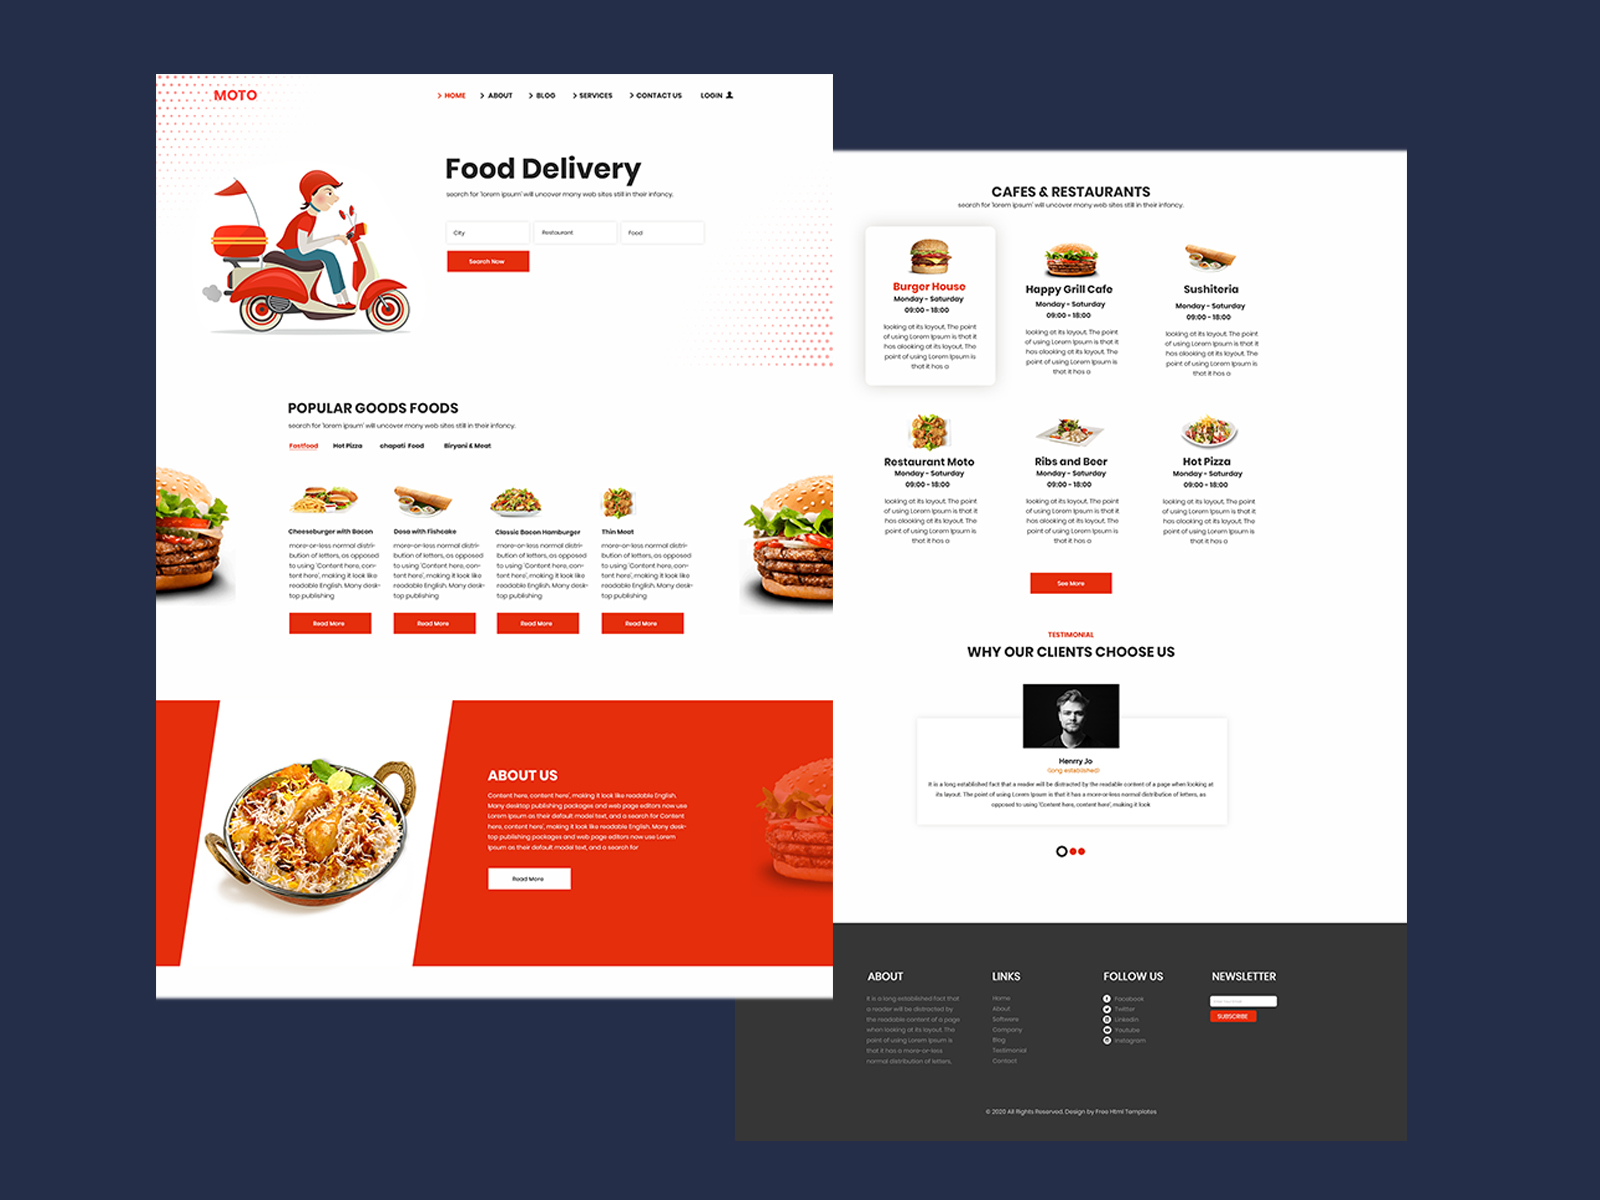 food-delivery-website-template-by-hemant-kumar-lodhi-on-dribbble